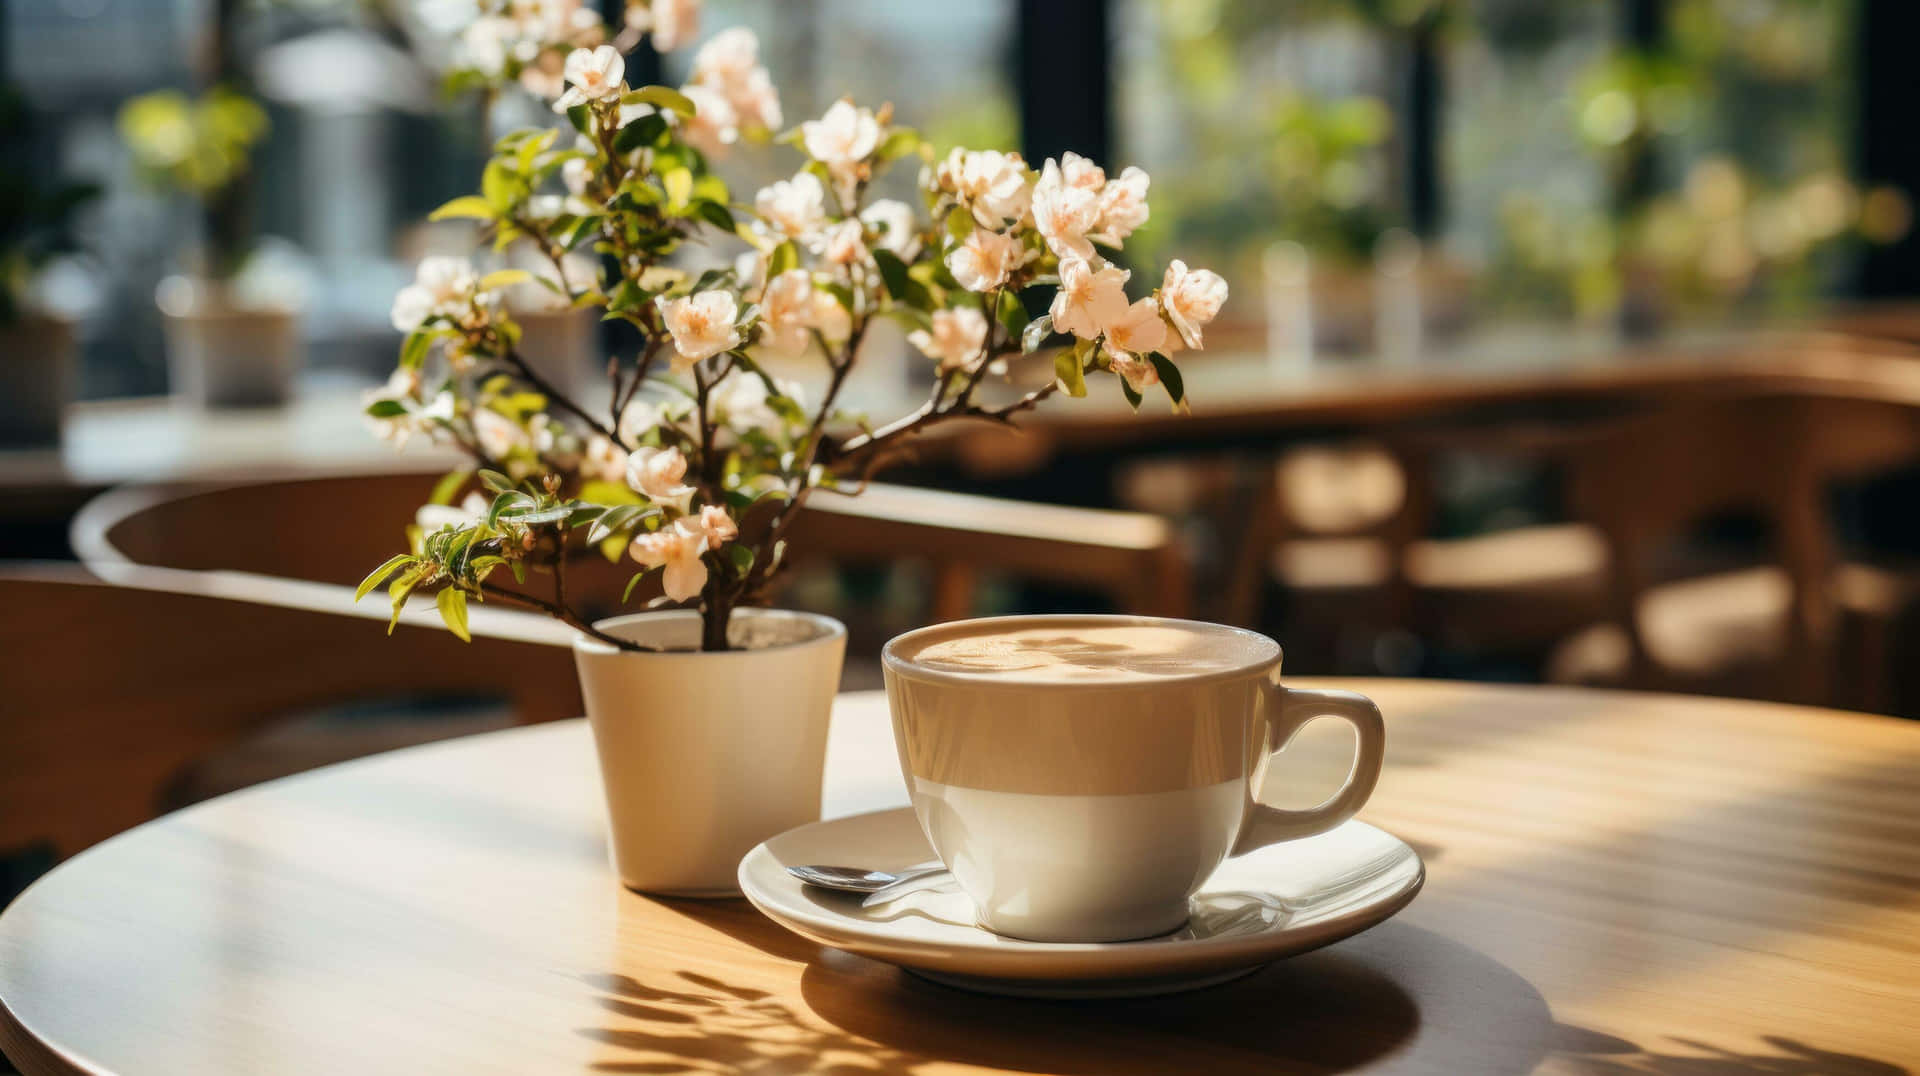 Sunny Coffee Shop Table With Flowers Wallpaper